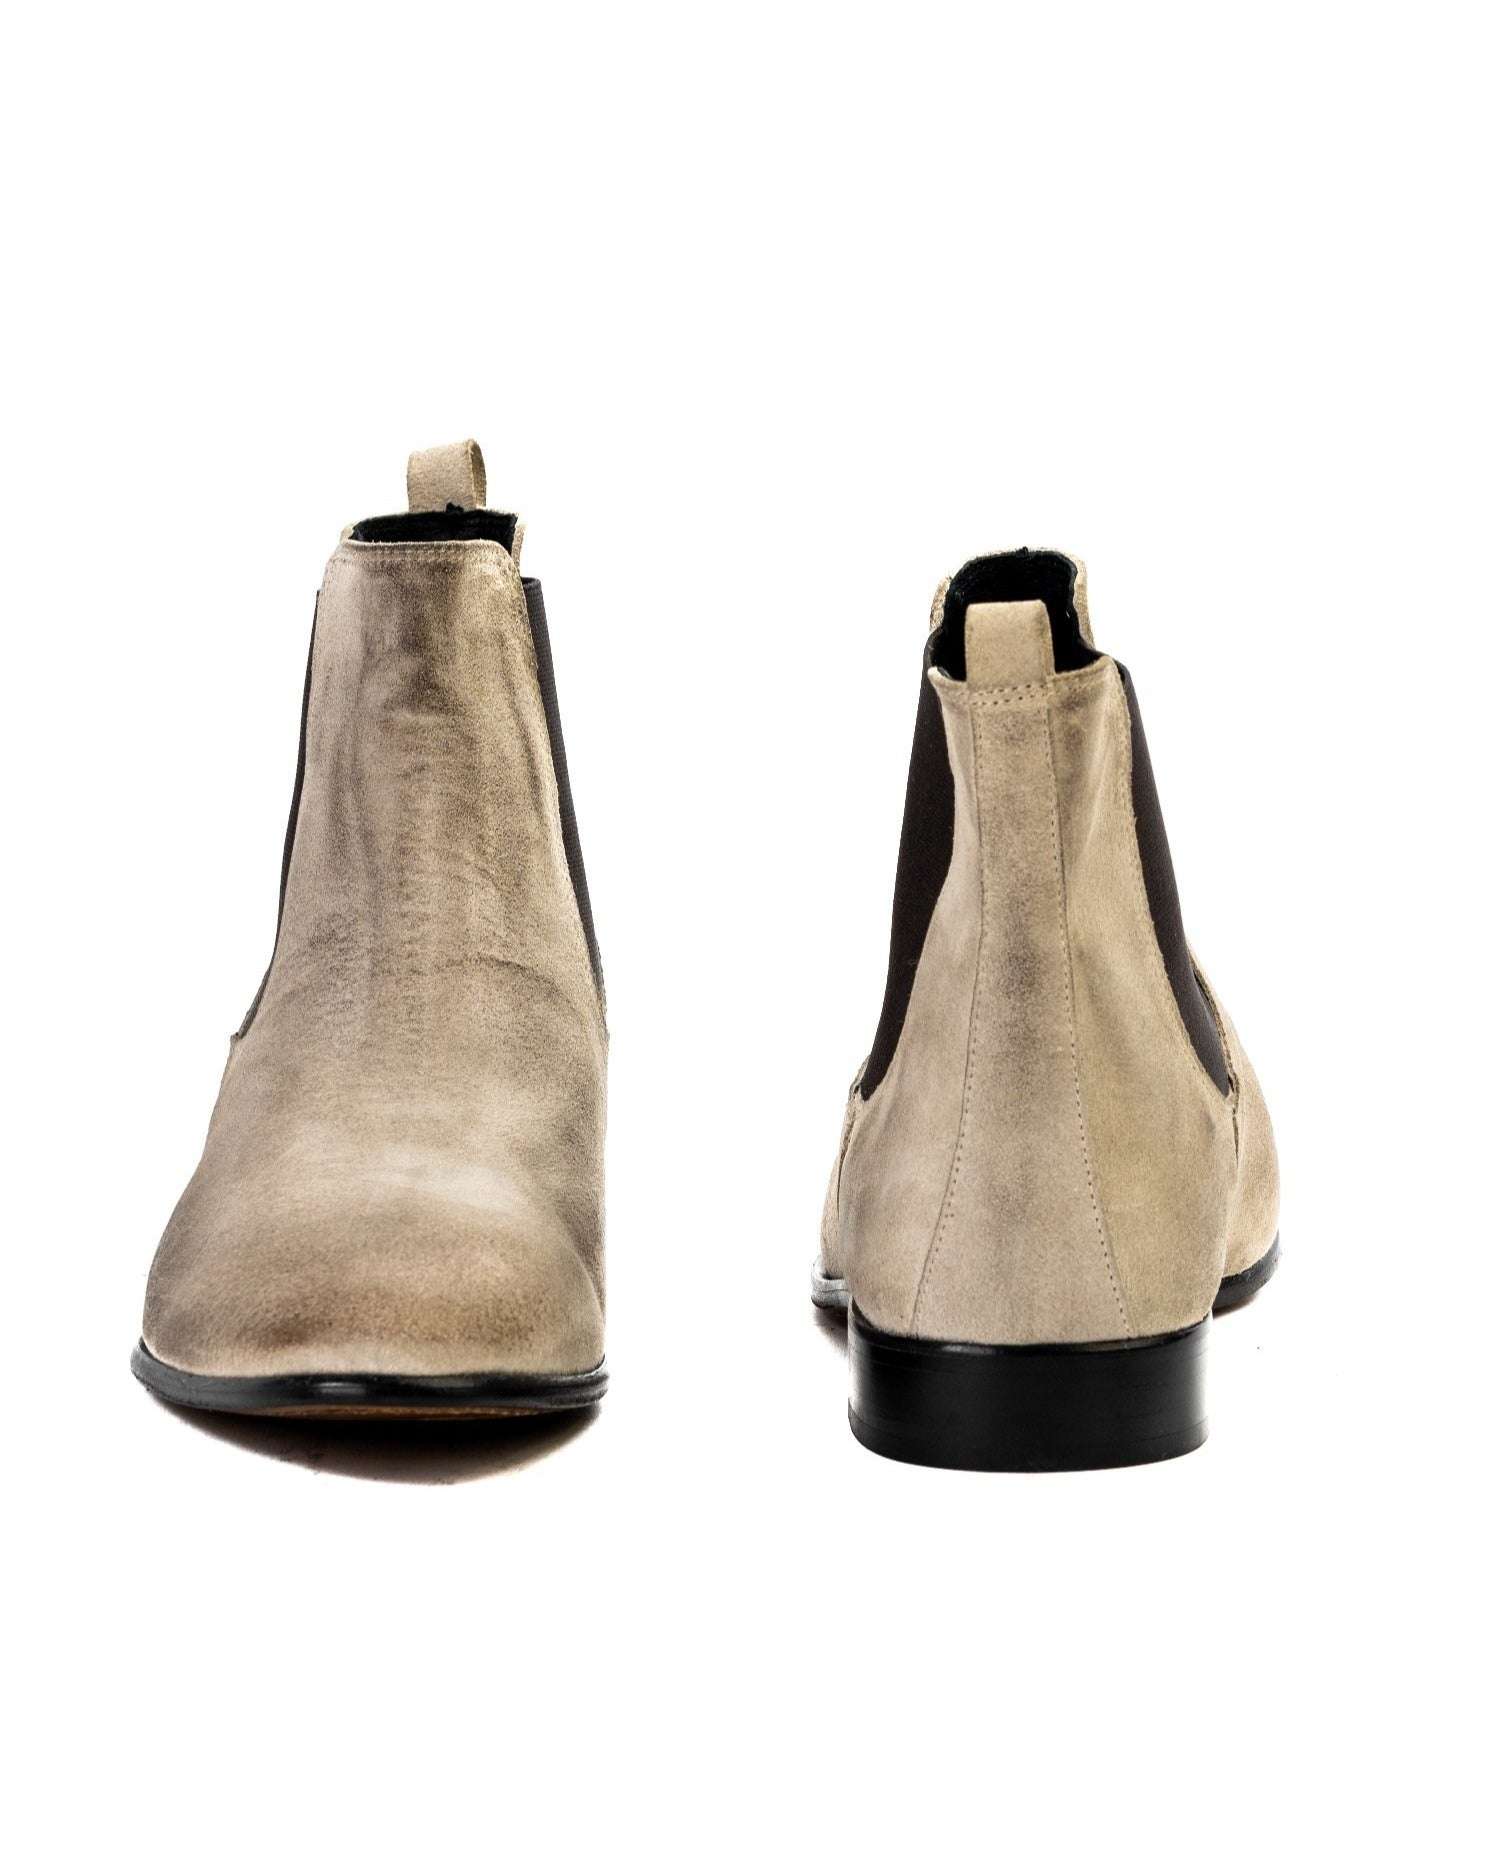 DRE - CHELSEA BOOTS CREAM SUEDE